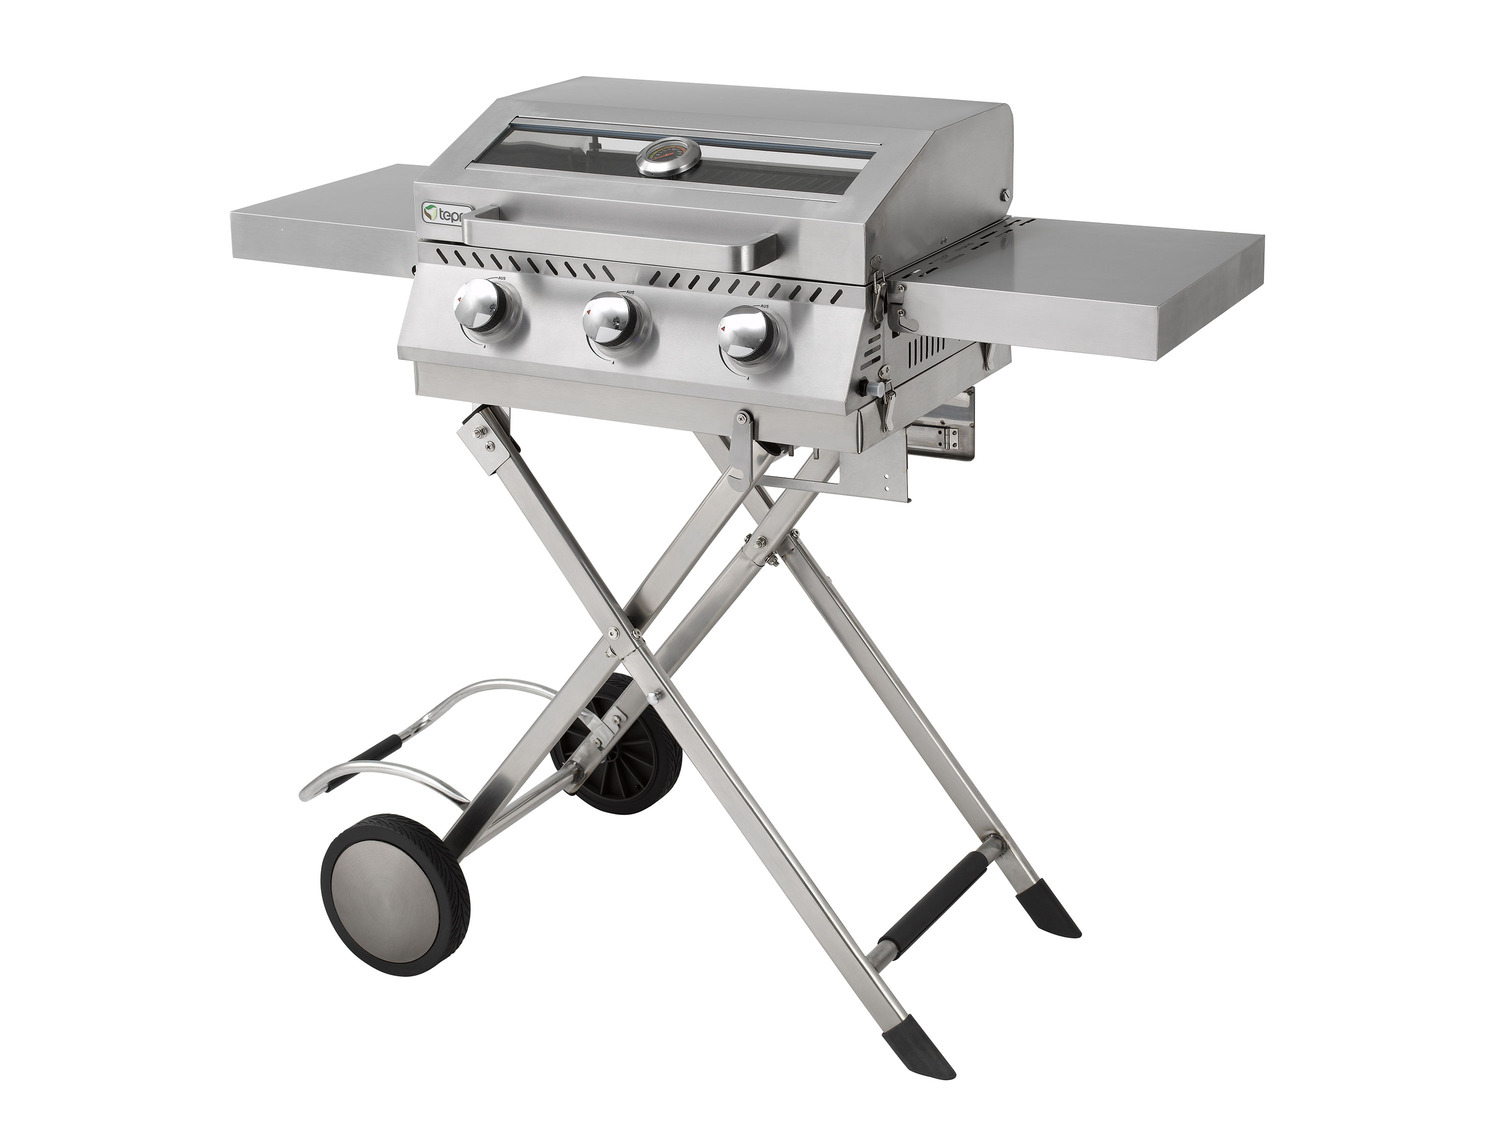 Edition, Brenner, tepro 9… 3 »Chicago« Special Gasgrill